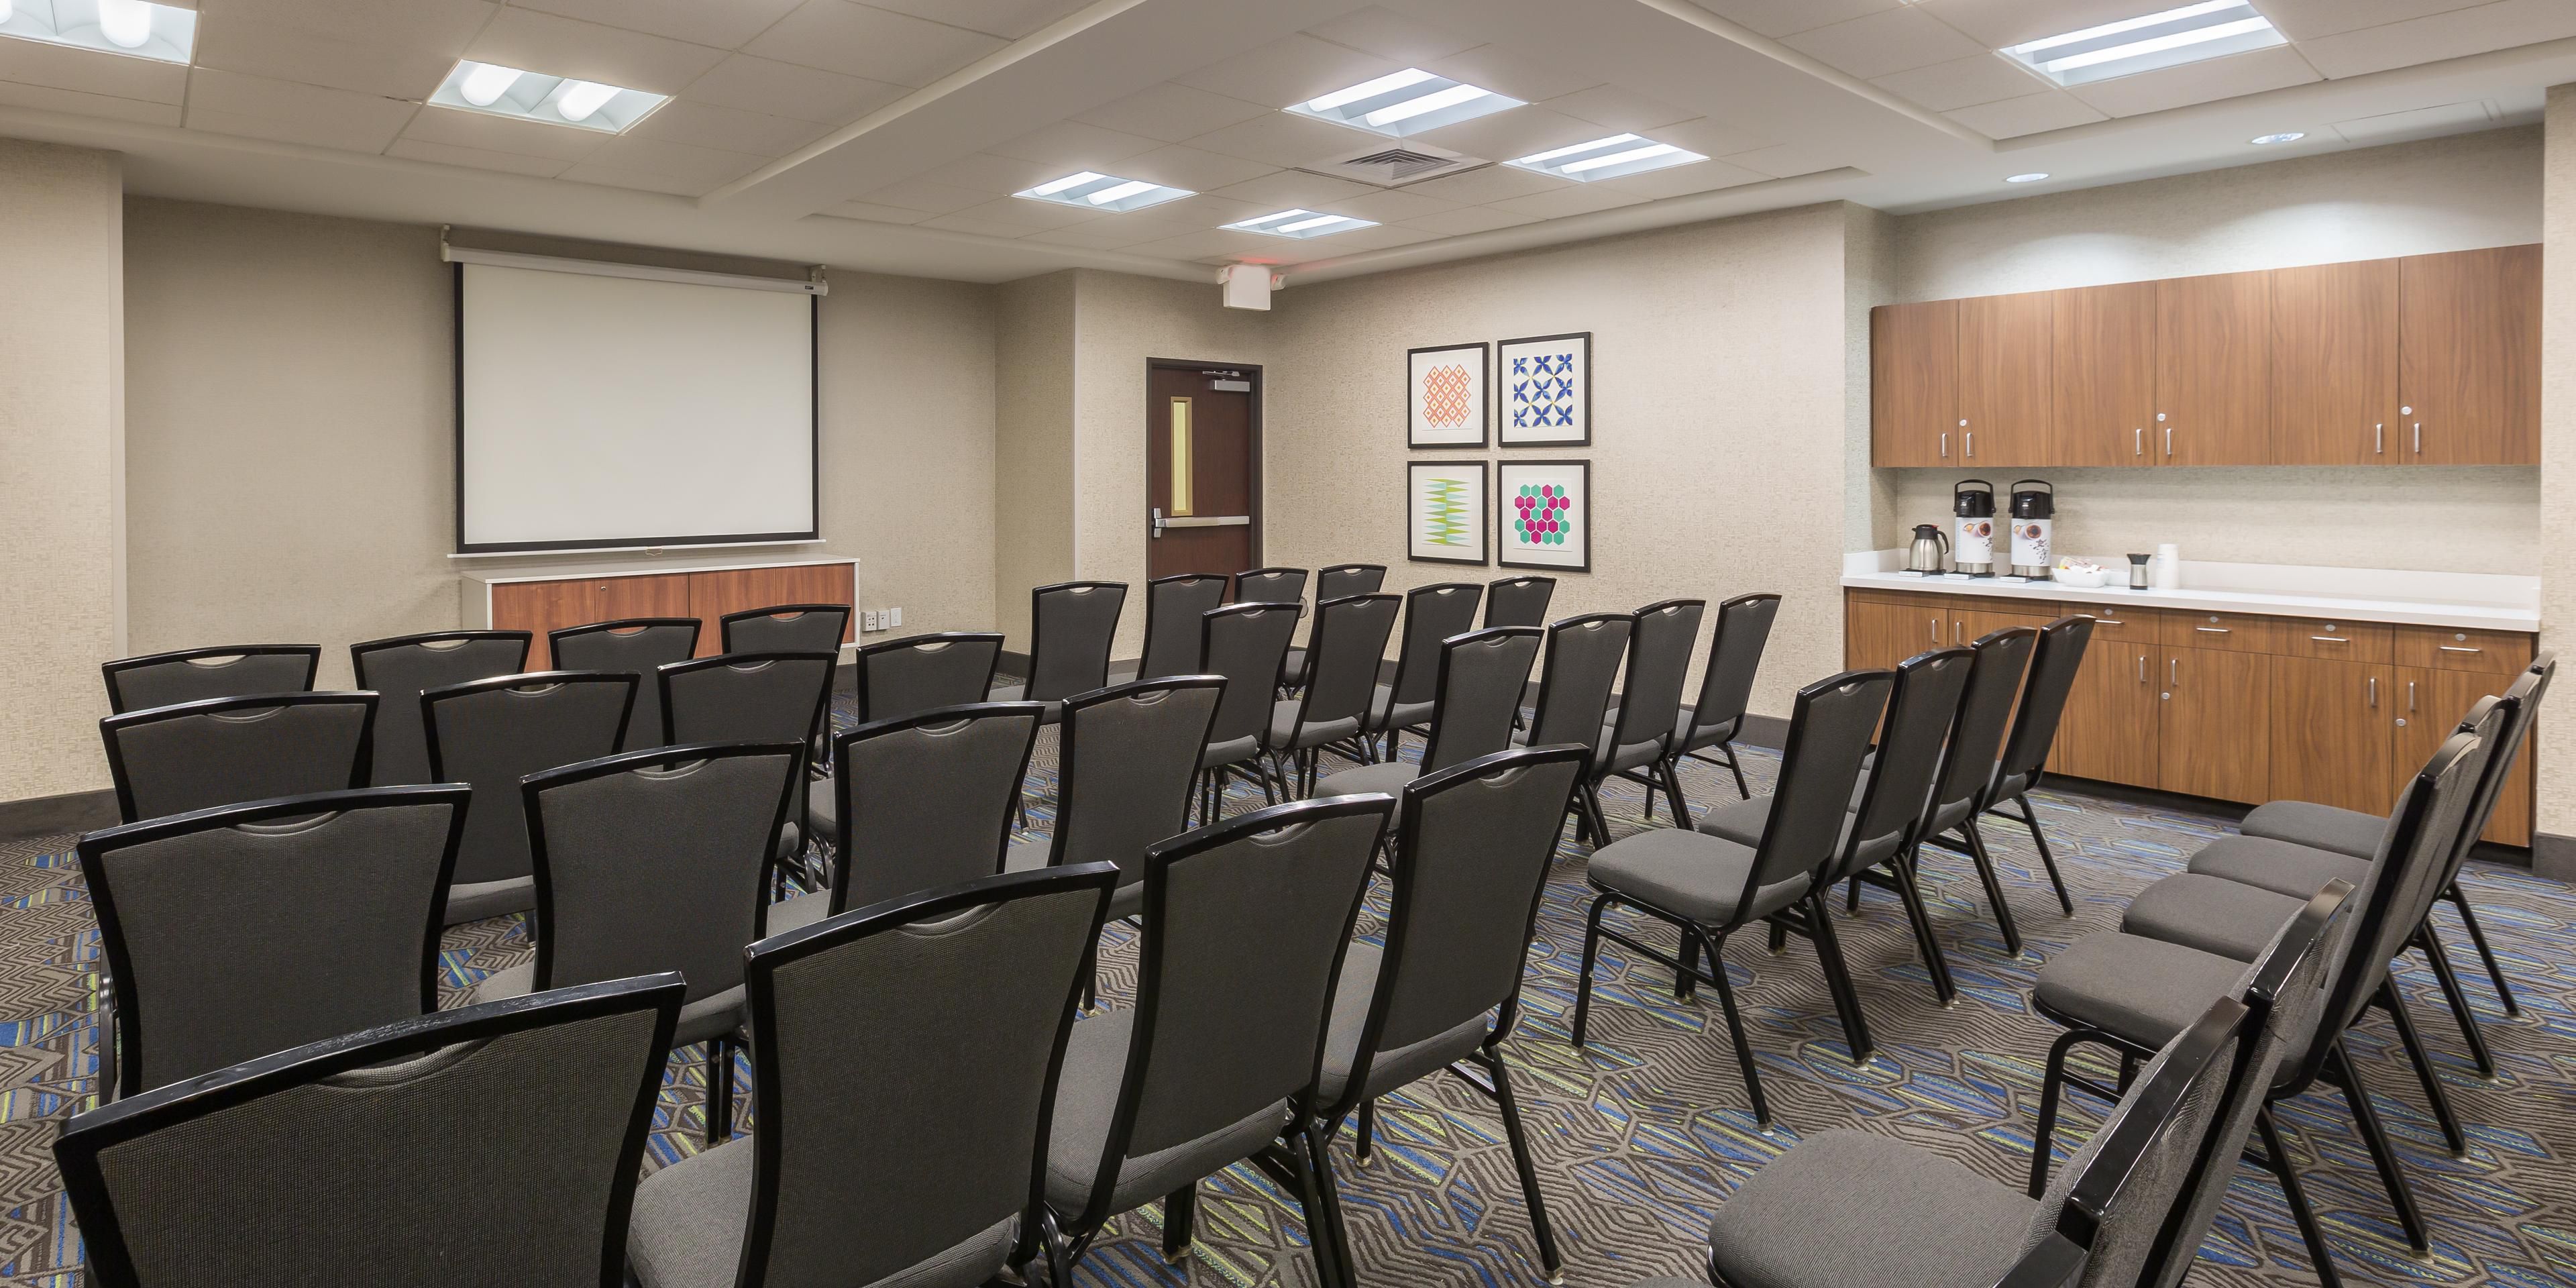 We make your meeting room planning effortless!  Whether
you are in need of space for a conference, staff meeting, training or special event, here at the Holiday Inn Express & Suites Eugene Downtown - University we have the location you're looking for.
